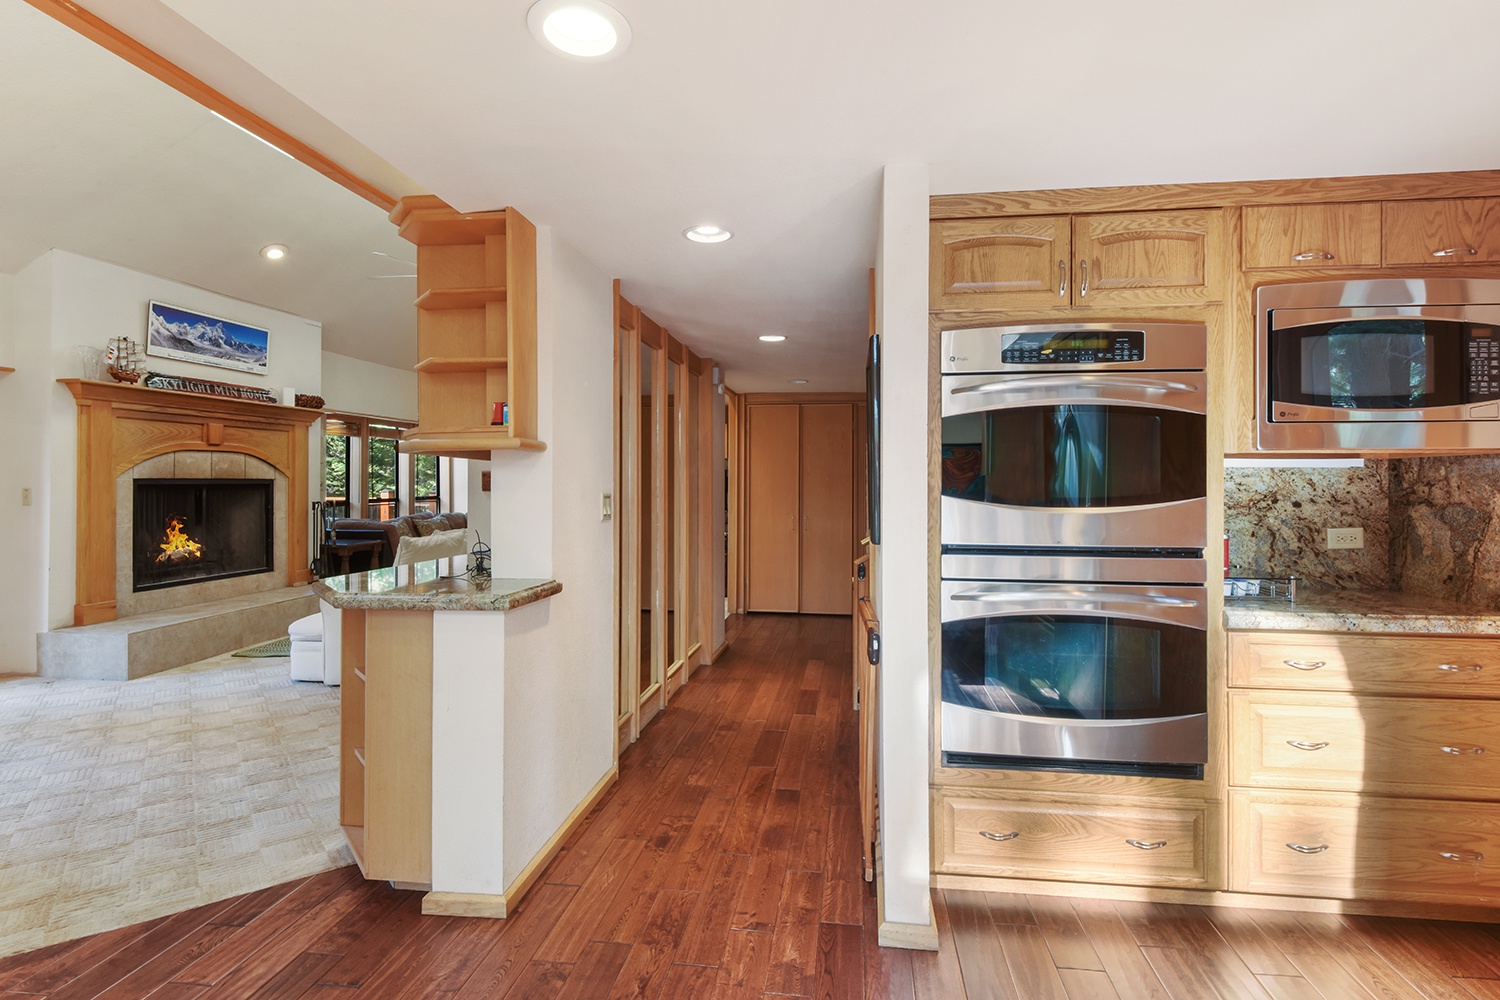 Full gourmet kitchen with stainless-steal appliances